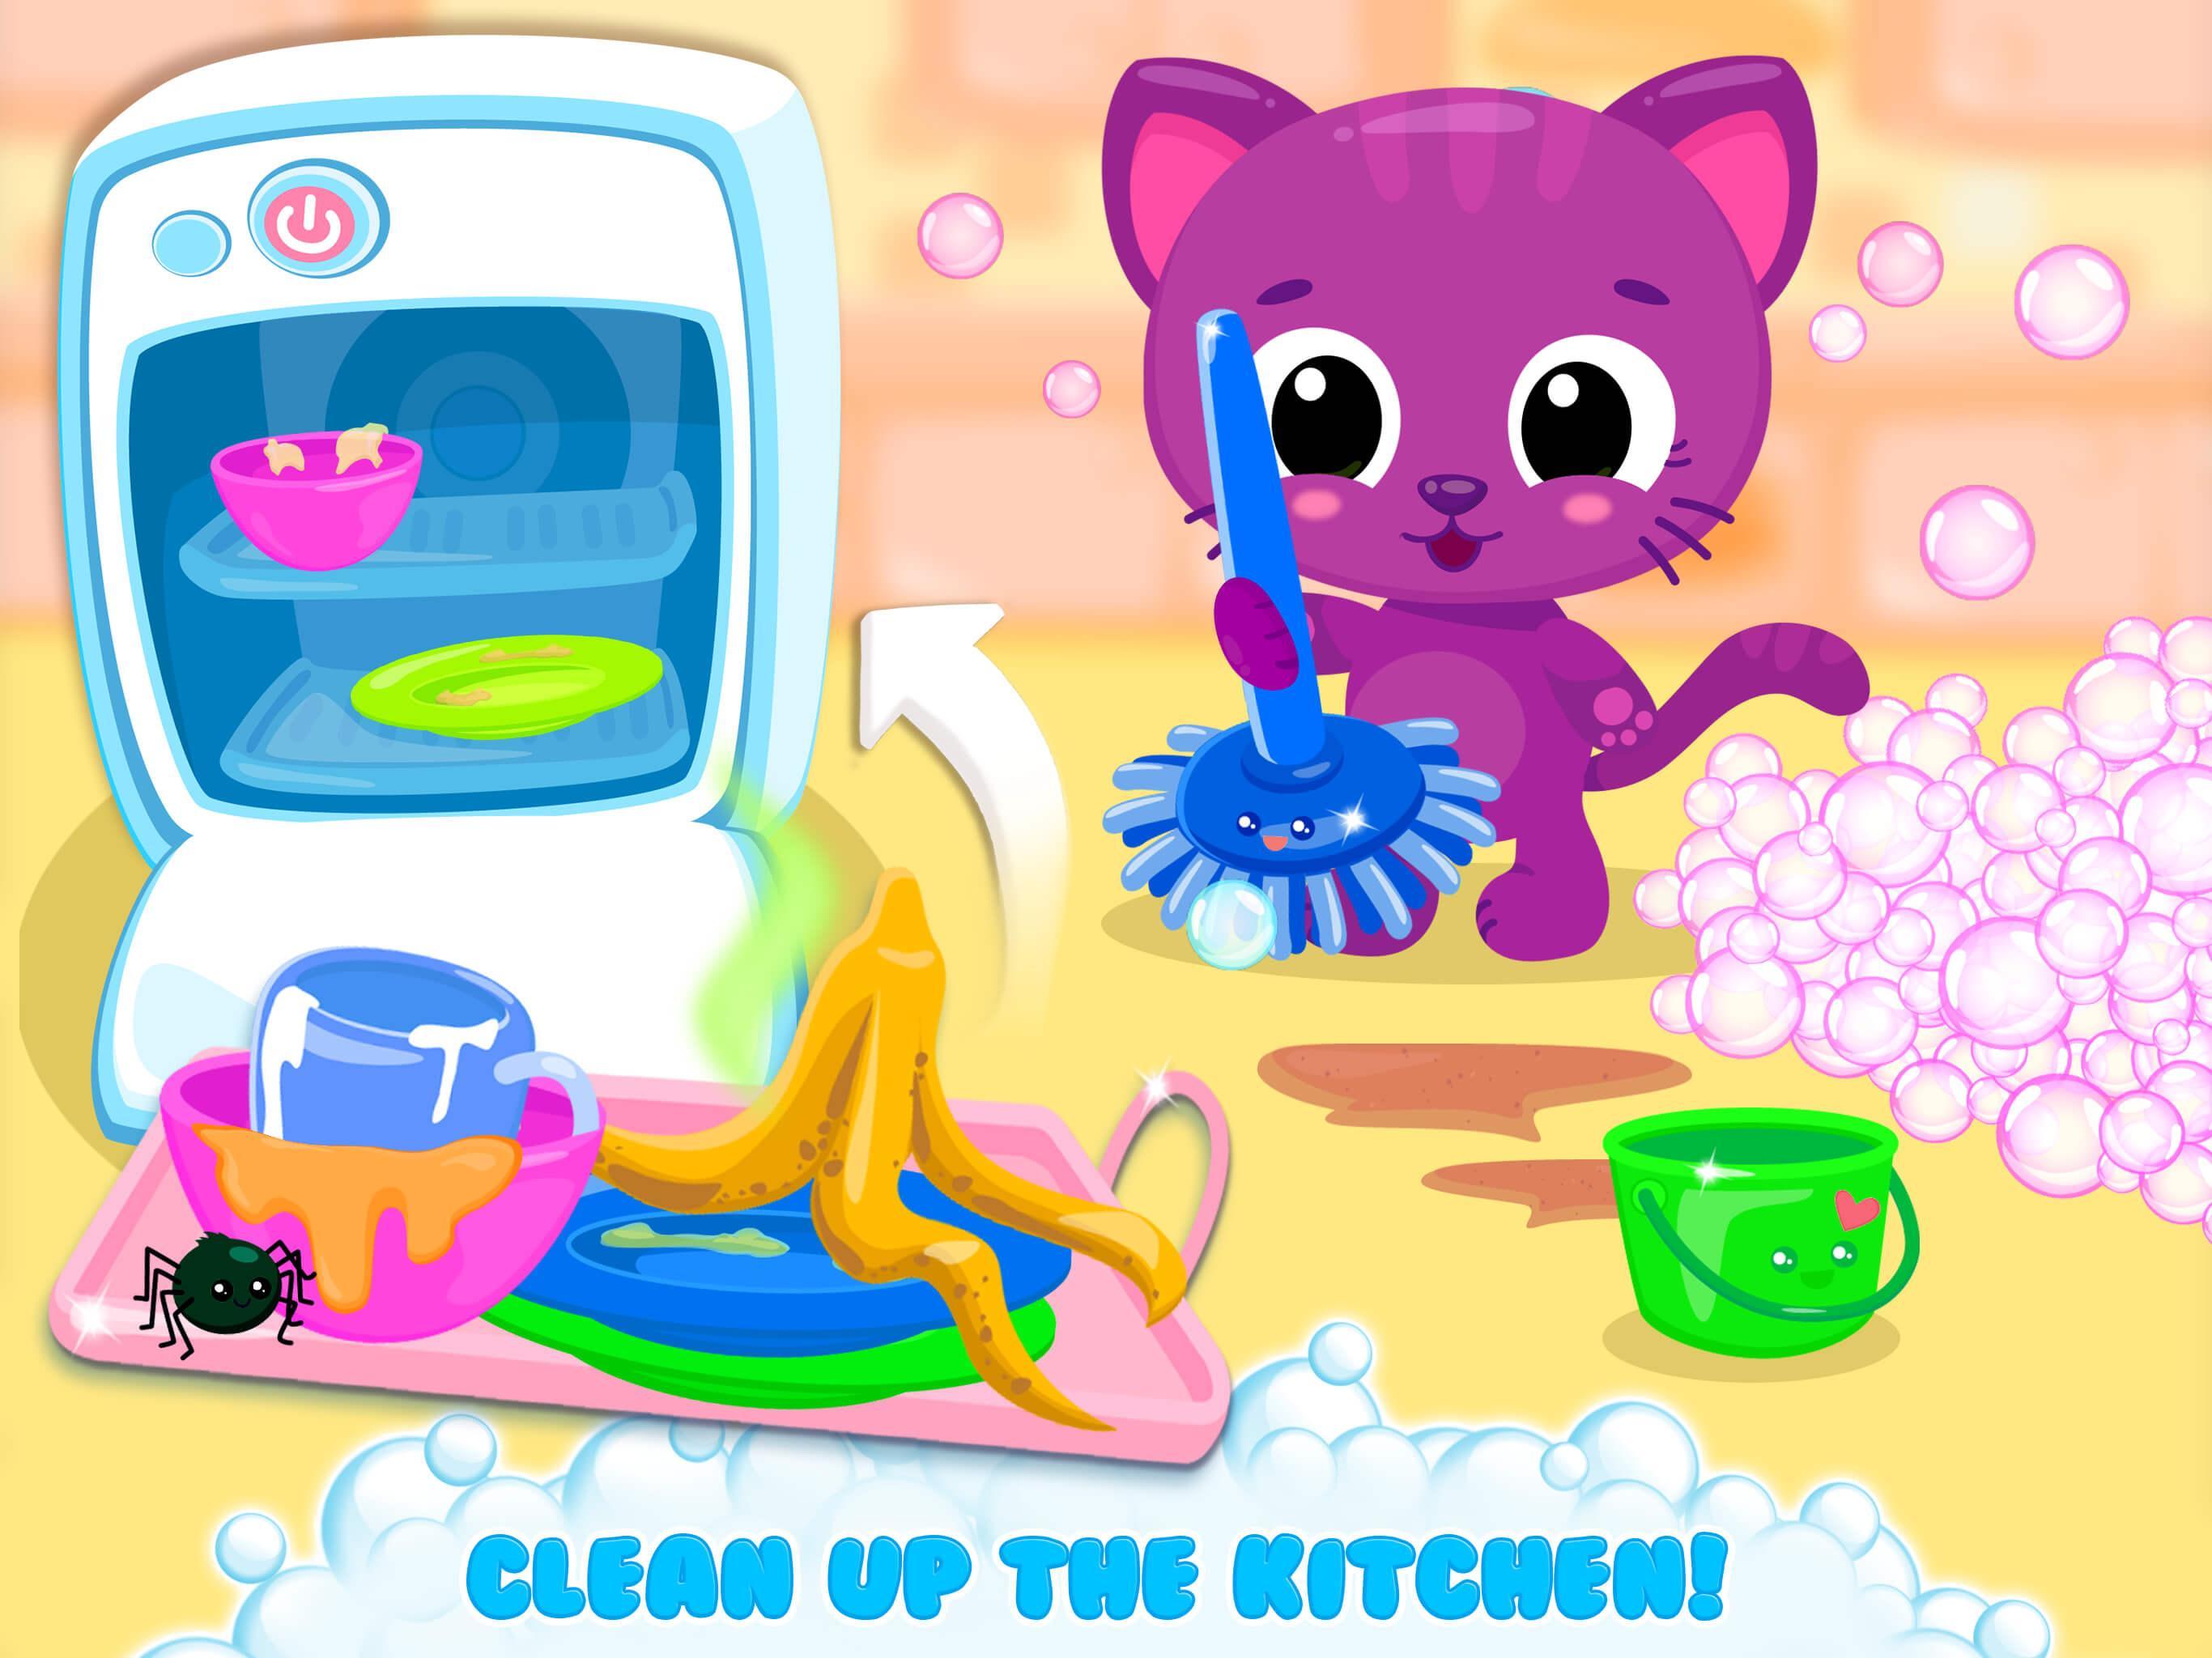 Cute & Tiny House Cleanup - Learn Daily Chores screenshot game